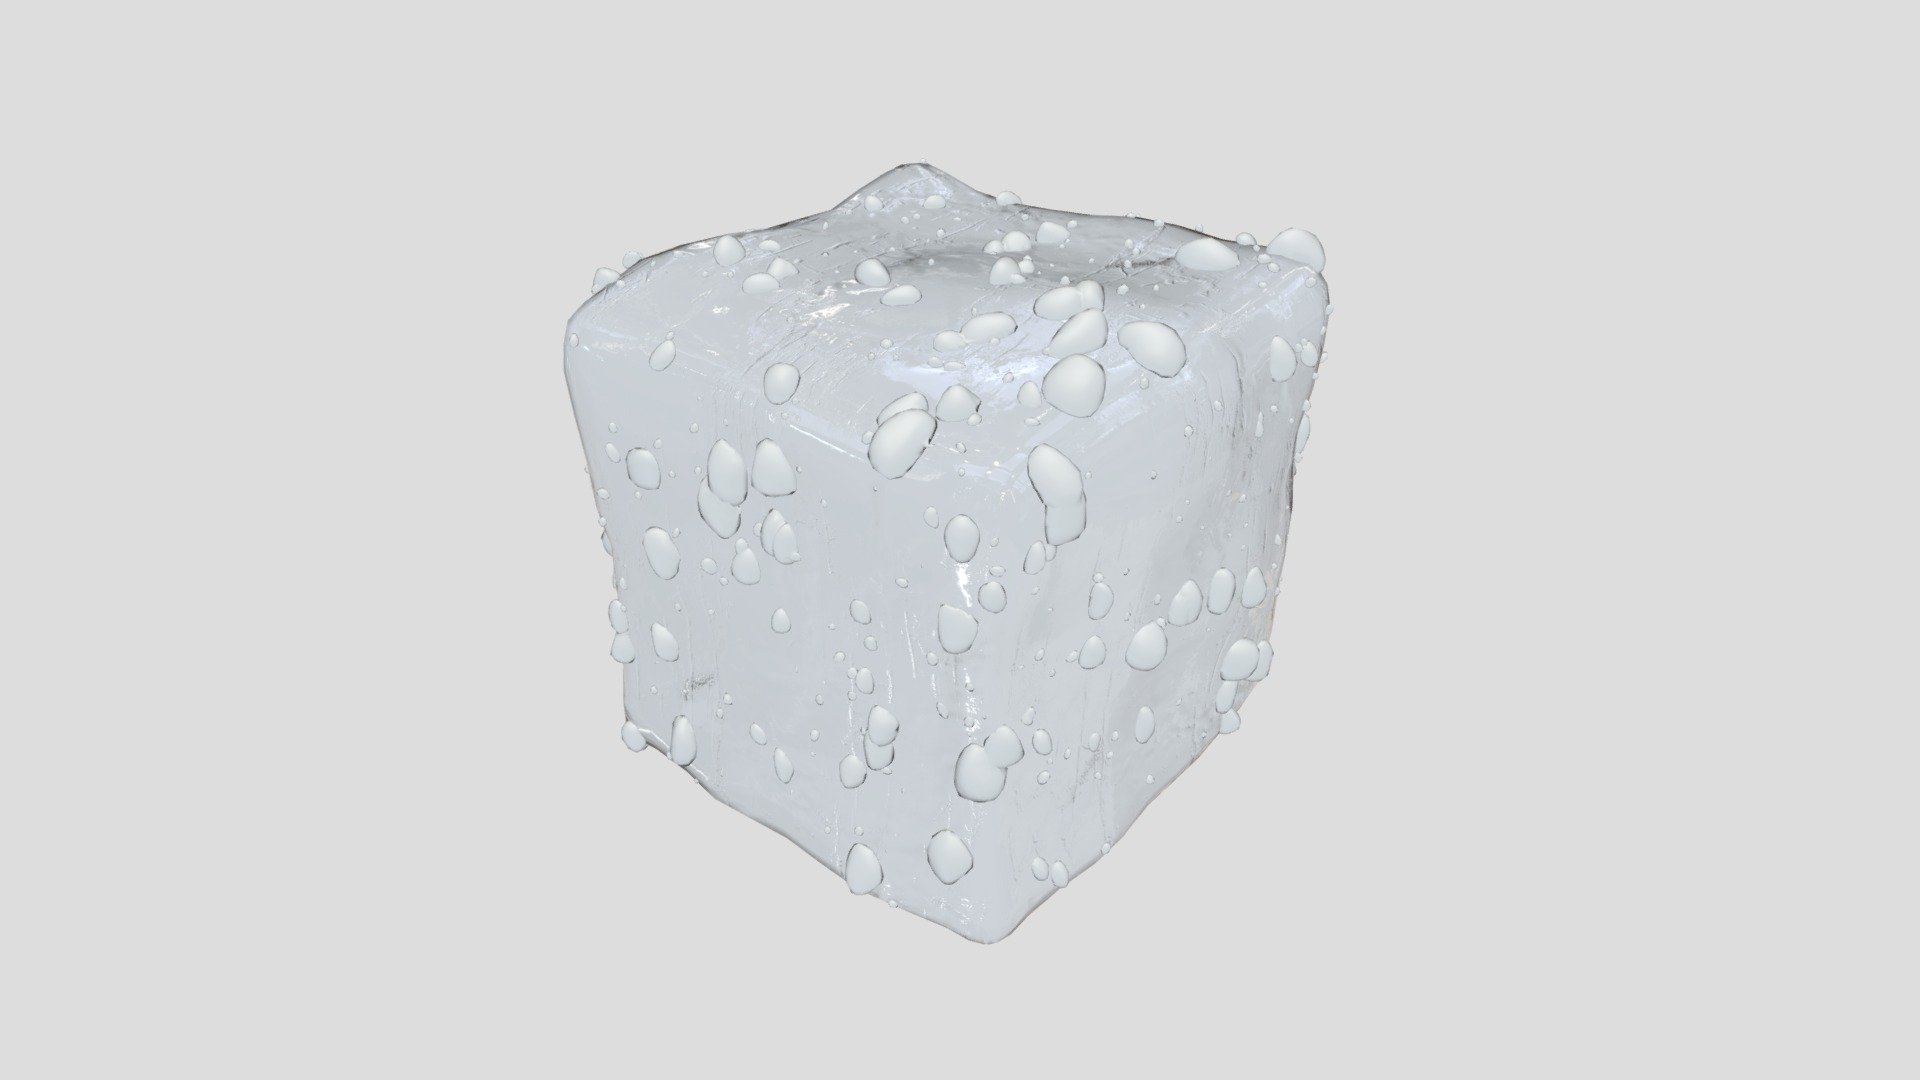 This Ice Cube is perfect for decorating any beverage or cold scene. The mesh has water drops on the exterior for extra detail which can easily be seperated. The mesh is viewable from all angles and distacnes.

This Includes:

The mesh (Ice Cube 1,014 Vertices, Water Droplets 30,049 Vertices)
2K texture Set (Albedo, Roughness, Normal, Height)
The color albedo is not necessary but there if you want colored ice cubes
The mesh is UV Unwrapped for easy retexturing - Ice Cube with Condensation - Buy Royalty Free 3D model by Desertsage 3d model